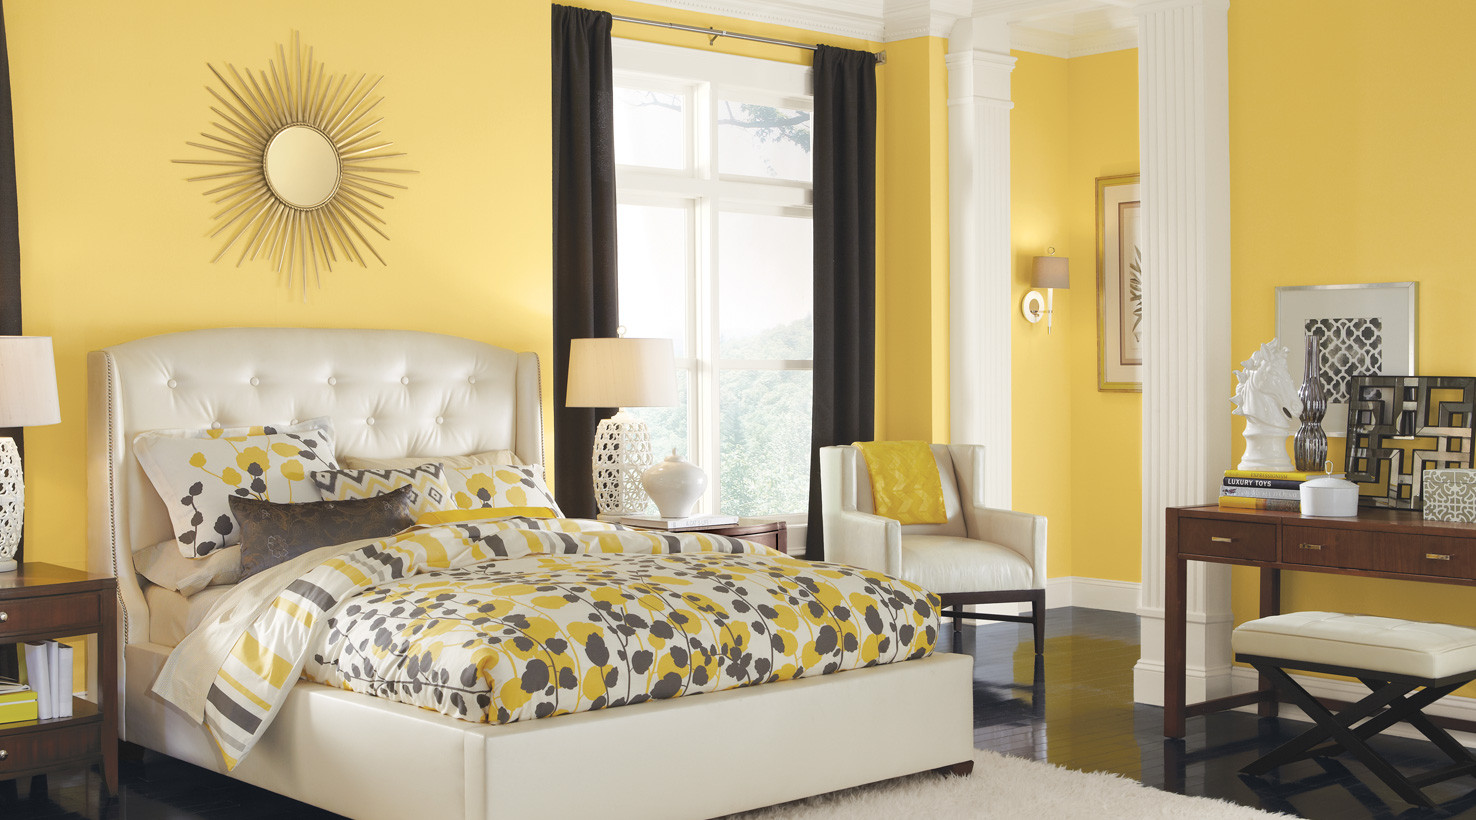 Paint Ideas For Bedroom
 Bedroom Paint Color Ideas Inspiration Gallery